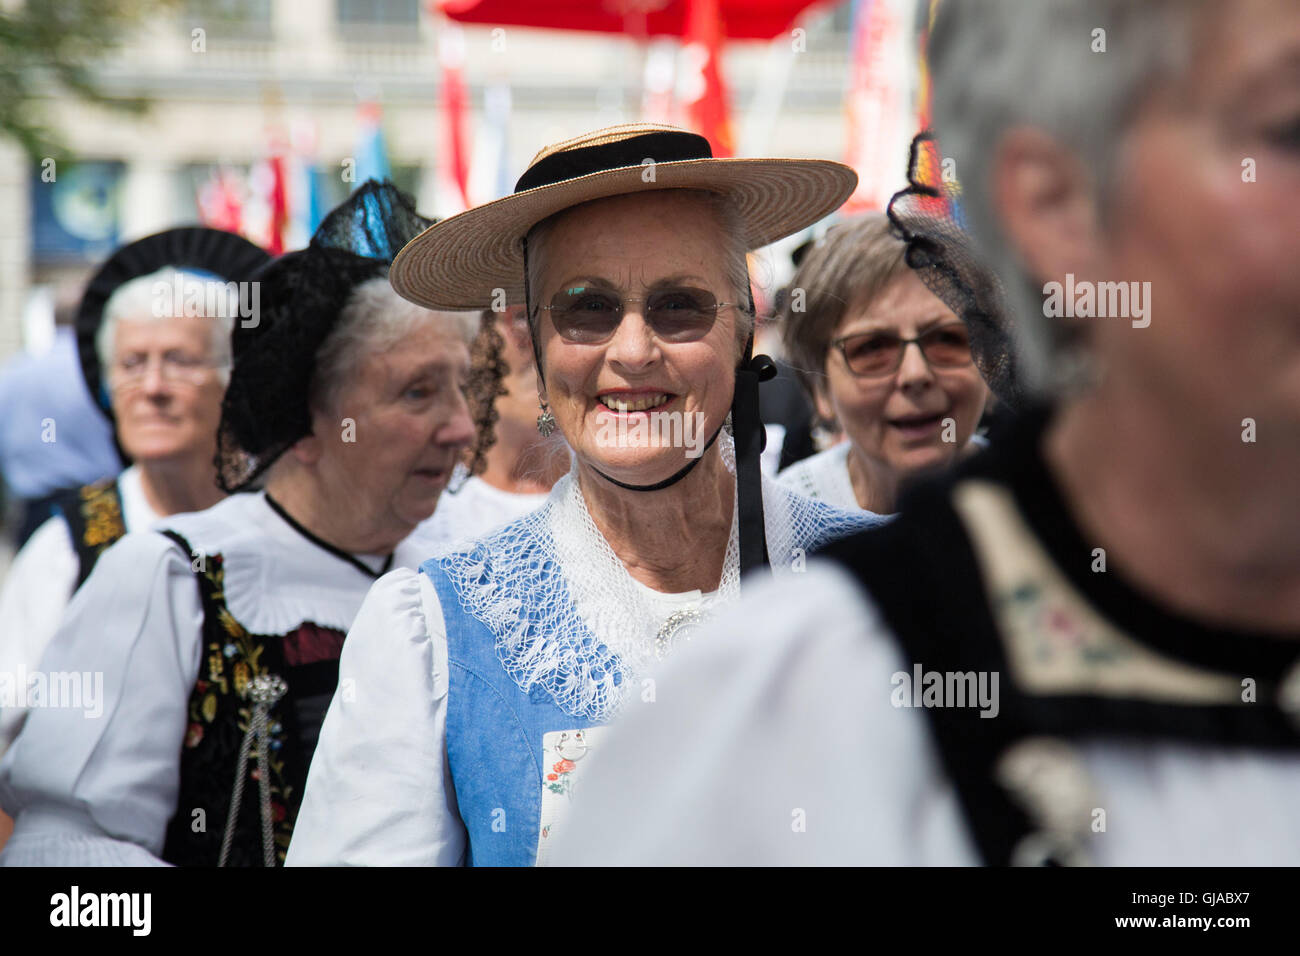 Women wear traditional dress at a ceremony in Zurich in celebration of Swiss National Day. Stock Photo